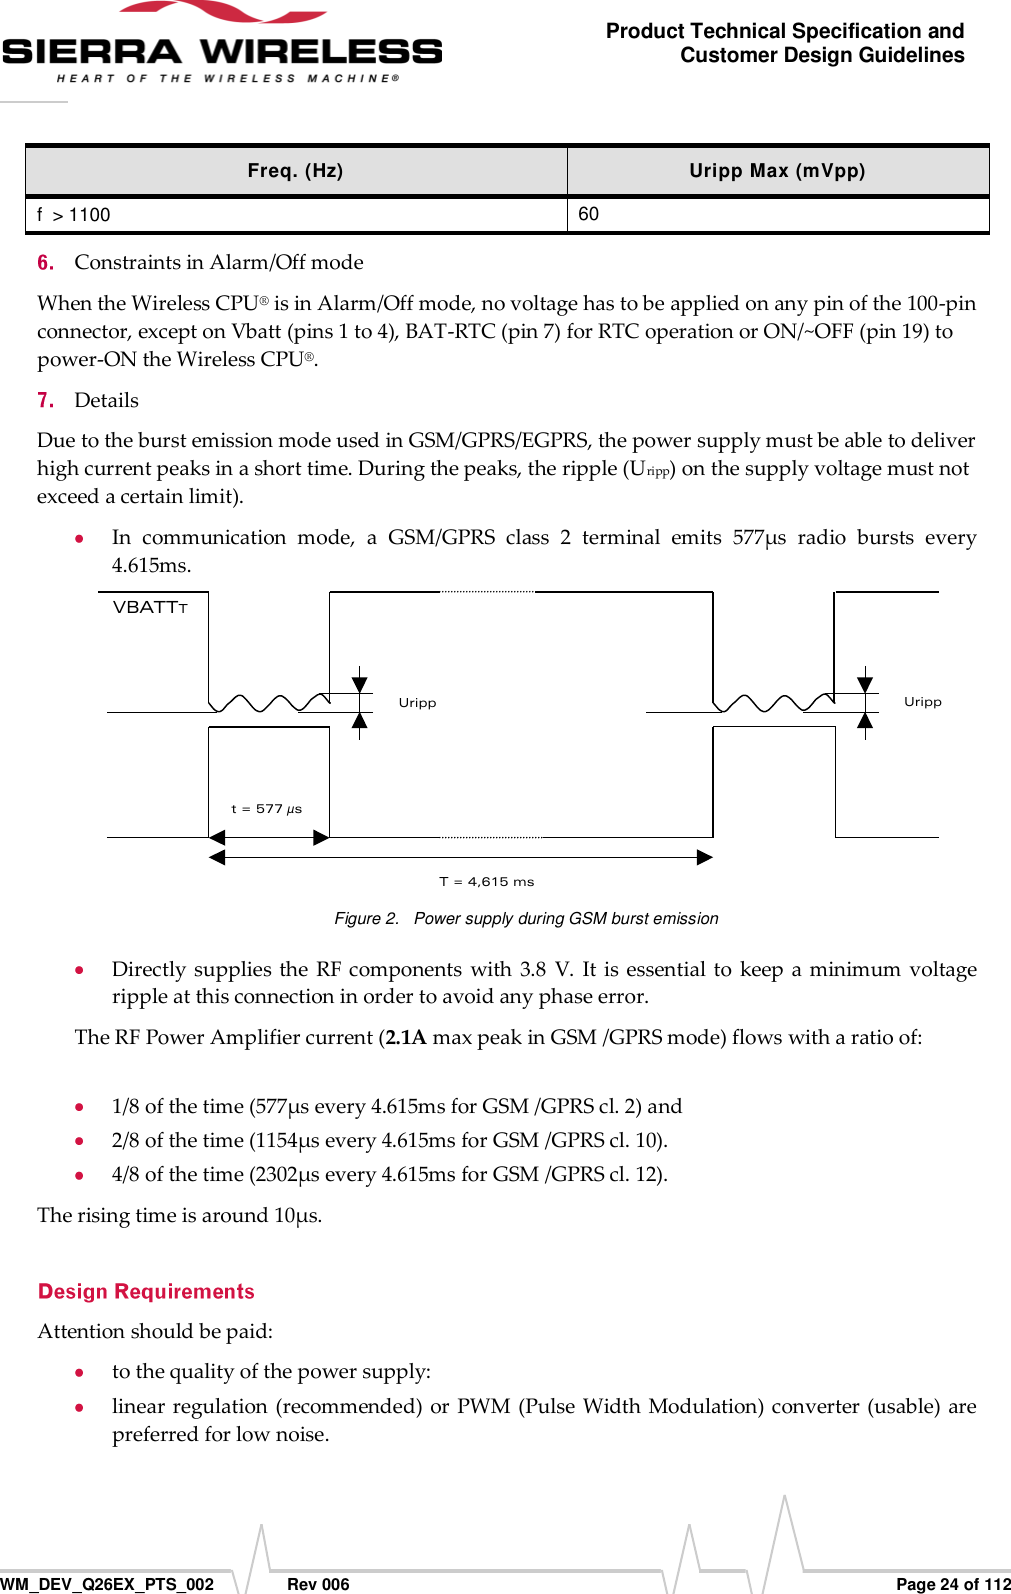      WM_DEV_Q26EX_PTS_002  Rev 006  Page 24 of 112 Product Technical Specification and Customer Design Guidelines Freq. (Hz) Uripp Max (mVpp) f  &gt; 1100 60  Constraints in Alarm/Off mode When the Wireless CPU® is in Alarm/Off mode, no voltage has to be applied on any pin of the 100-pin connector, except on Vbatt (pins 1 to 4), BAT-RTC (pin 7) for RTC operation or ON/~OFF (pin 19) to power-ON the Wireless CPU®.  Details Due to the burst emission mode used in GSM/GPRS/EGPRS, the power supply must be able to deliver high current peaks in a short time. During the peaks, the ripple (Uripp) on the supply voltage must not exceed a certain limit).   In  communication  mode,  a  GSM/GPRS  class  2  terminal  emits  577µs  radio  bursts  every 4.615ms.  Uripp VBATTT Uripp  T = 4,615 ms t = 577 µs  Figure 2.  Power supply during GSM burst emission  Directly  supplies  the  RF components  with 3.8  V. It  is essential to  keep  a minimum voltage ripple at this connection in order to avoid any phase error.  The RF Power Amplifier current (2.1A max peak in GSM /GPRS mode) flows with a ratio of:   1/8 of the time (577µs every 4.615ms for GSM /GPRS cl. 2) and   2/8 of the time (1154µs every 4.615ms for GSM /GPRS cl. 10).   4/8 of the time (2302µs every 4.615ms for GSM /GPRS cl. 12).  The rising time is around 10µs.  Attention should be paid:  to the quality of the power supply:  linear regulation (recommended) or  PWM (Pulse Width Modulation) converter (usable) are preferred for low noise. 